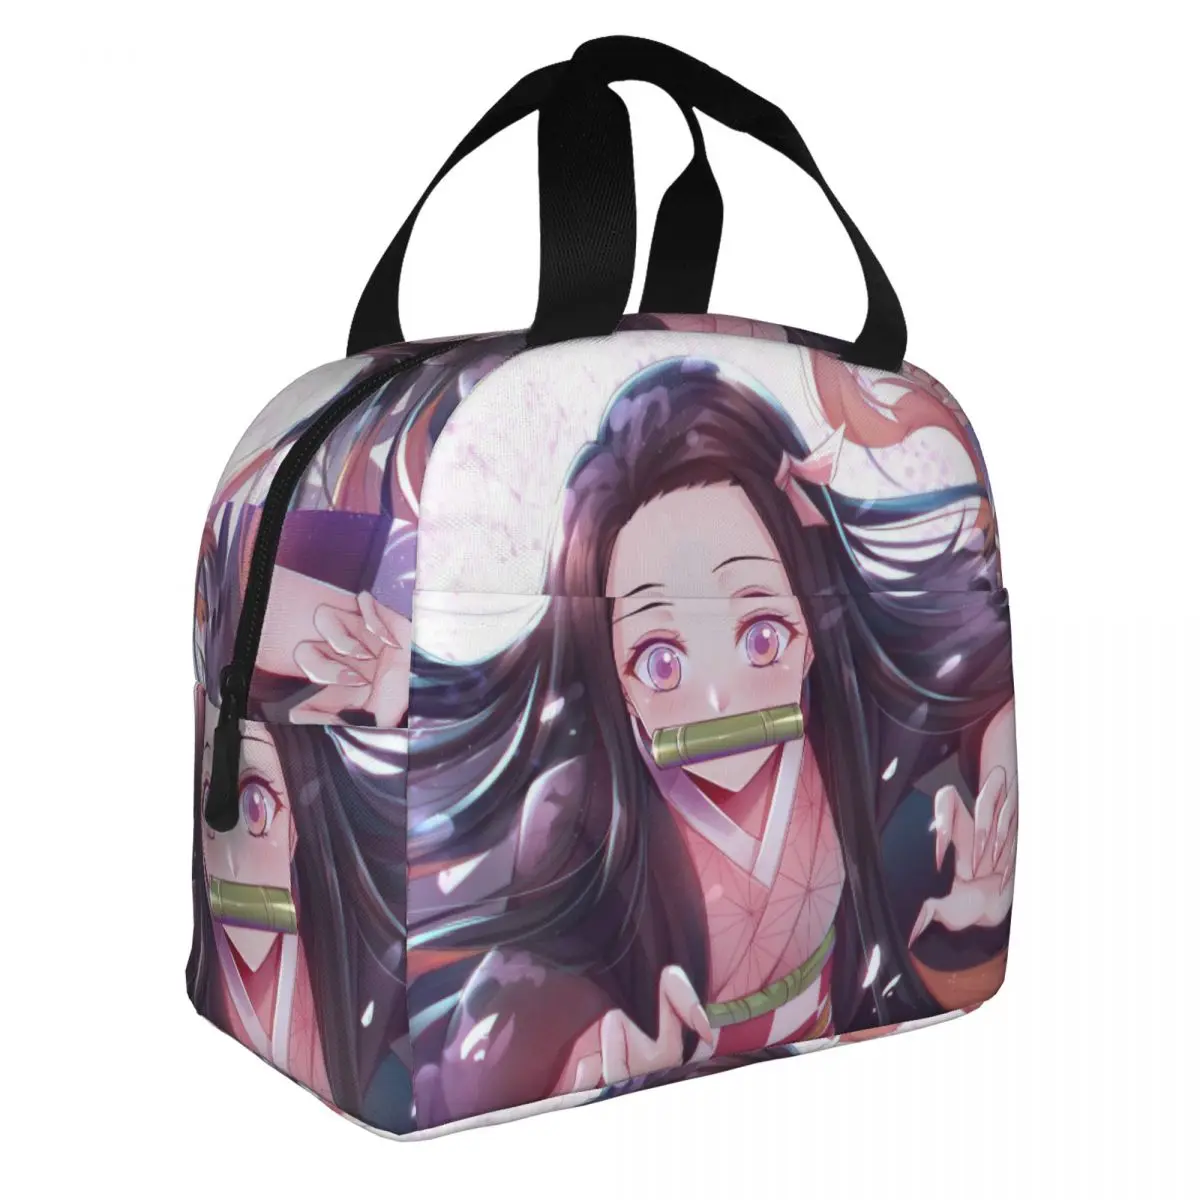 

Kamado Nezuko Insulated Lunch Bag Thermal Bag Meal Container Demon Slayer Japanese Devil's Blade Anime Tote Lunch Box Picnic